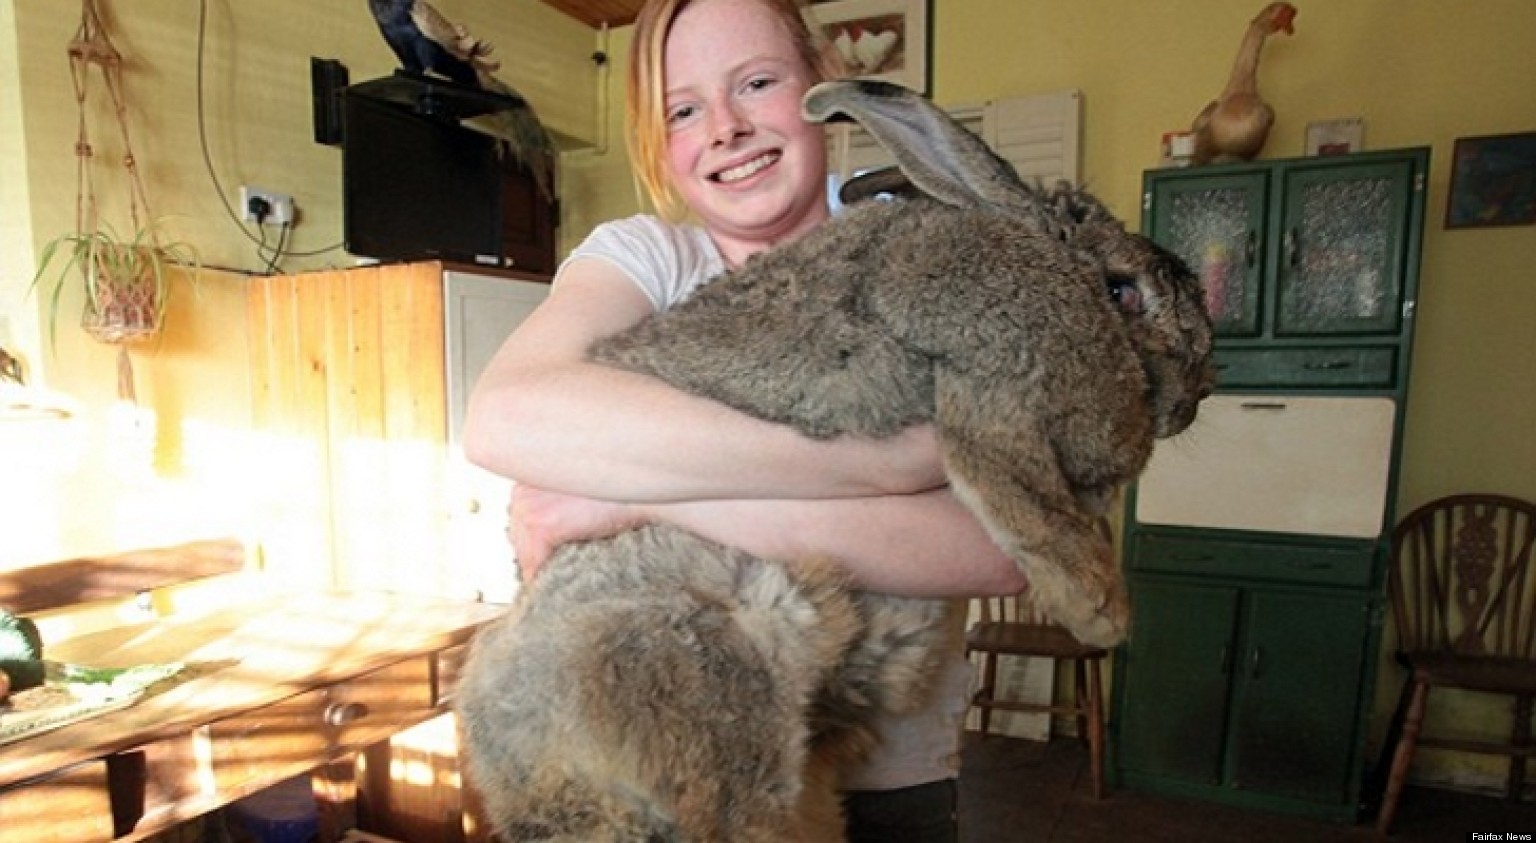 Ralph Worlds Largest Bunny Rabbit Weighs 55 Pounds And Eats 90 Of